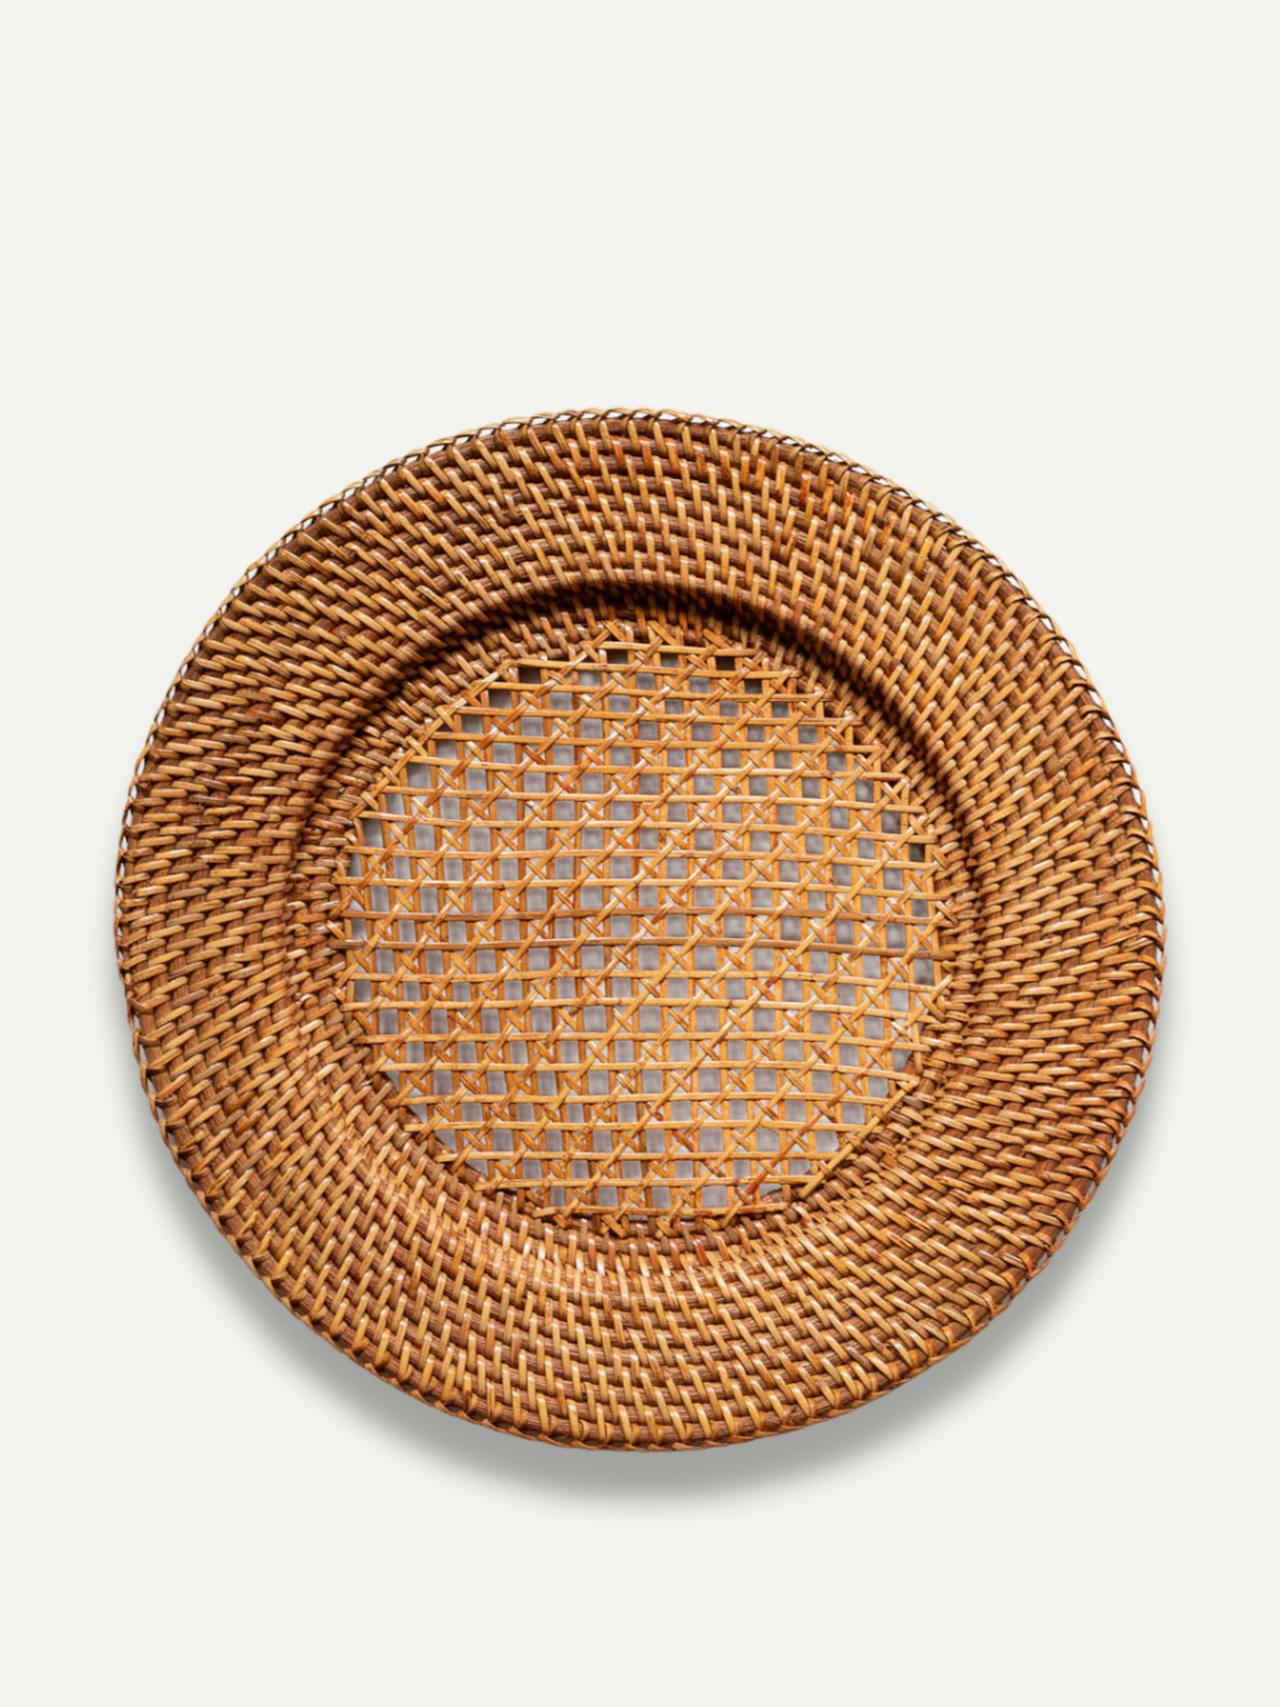 Rattan charger plate